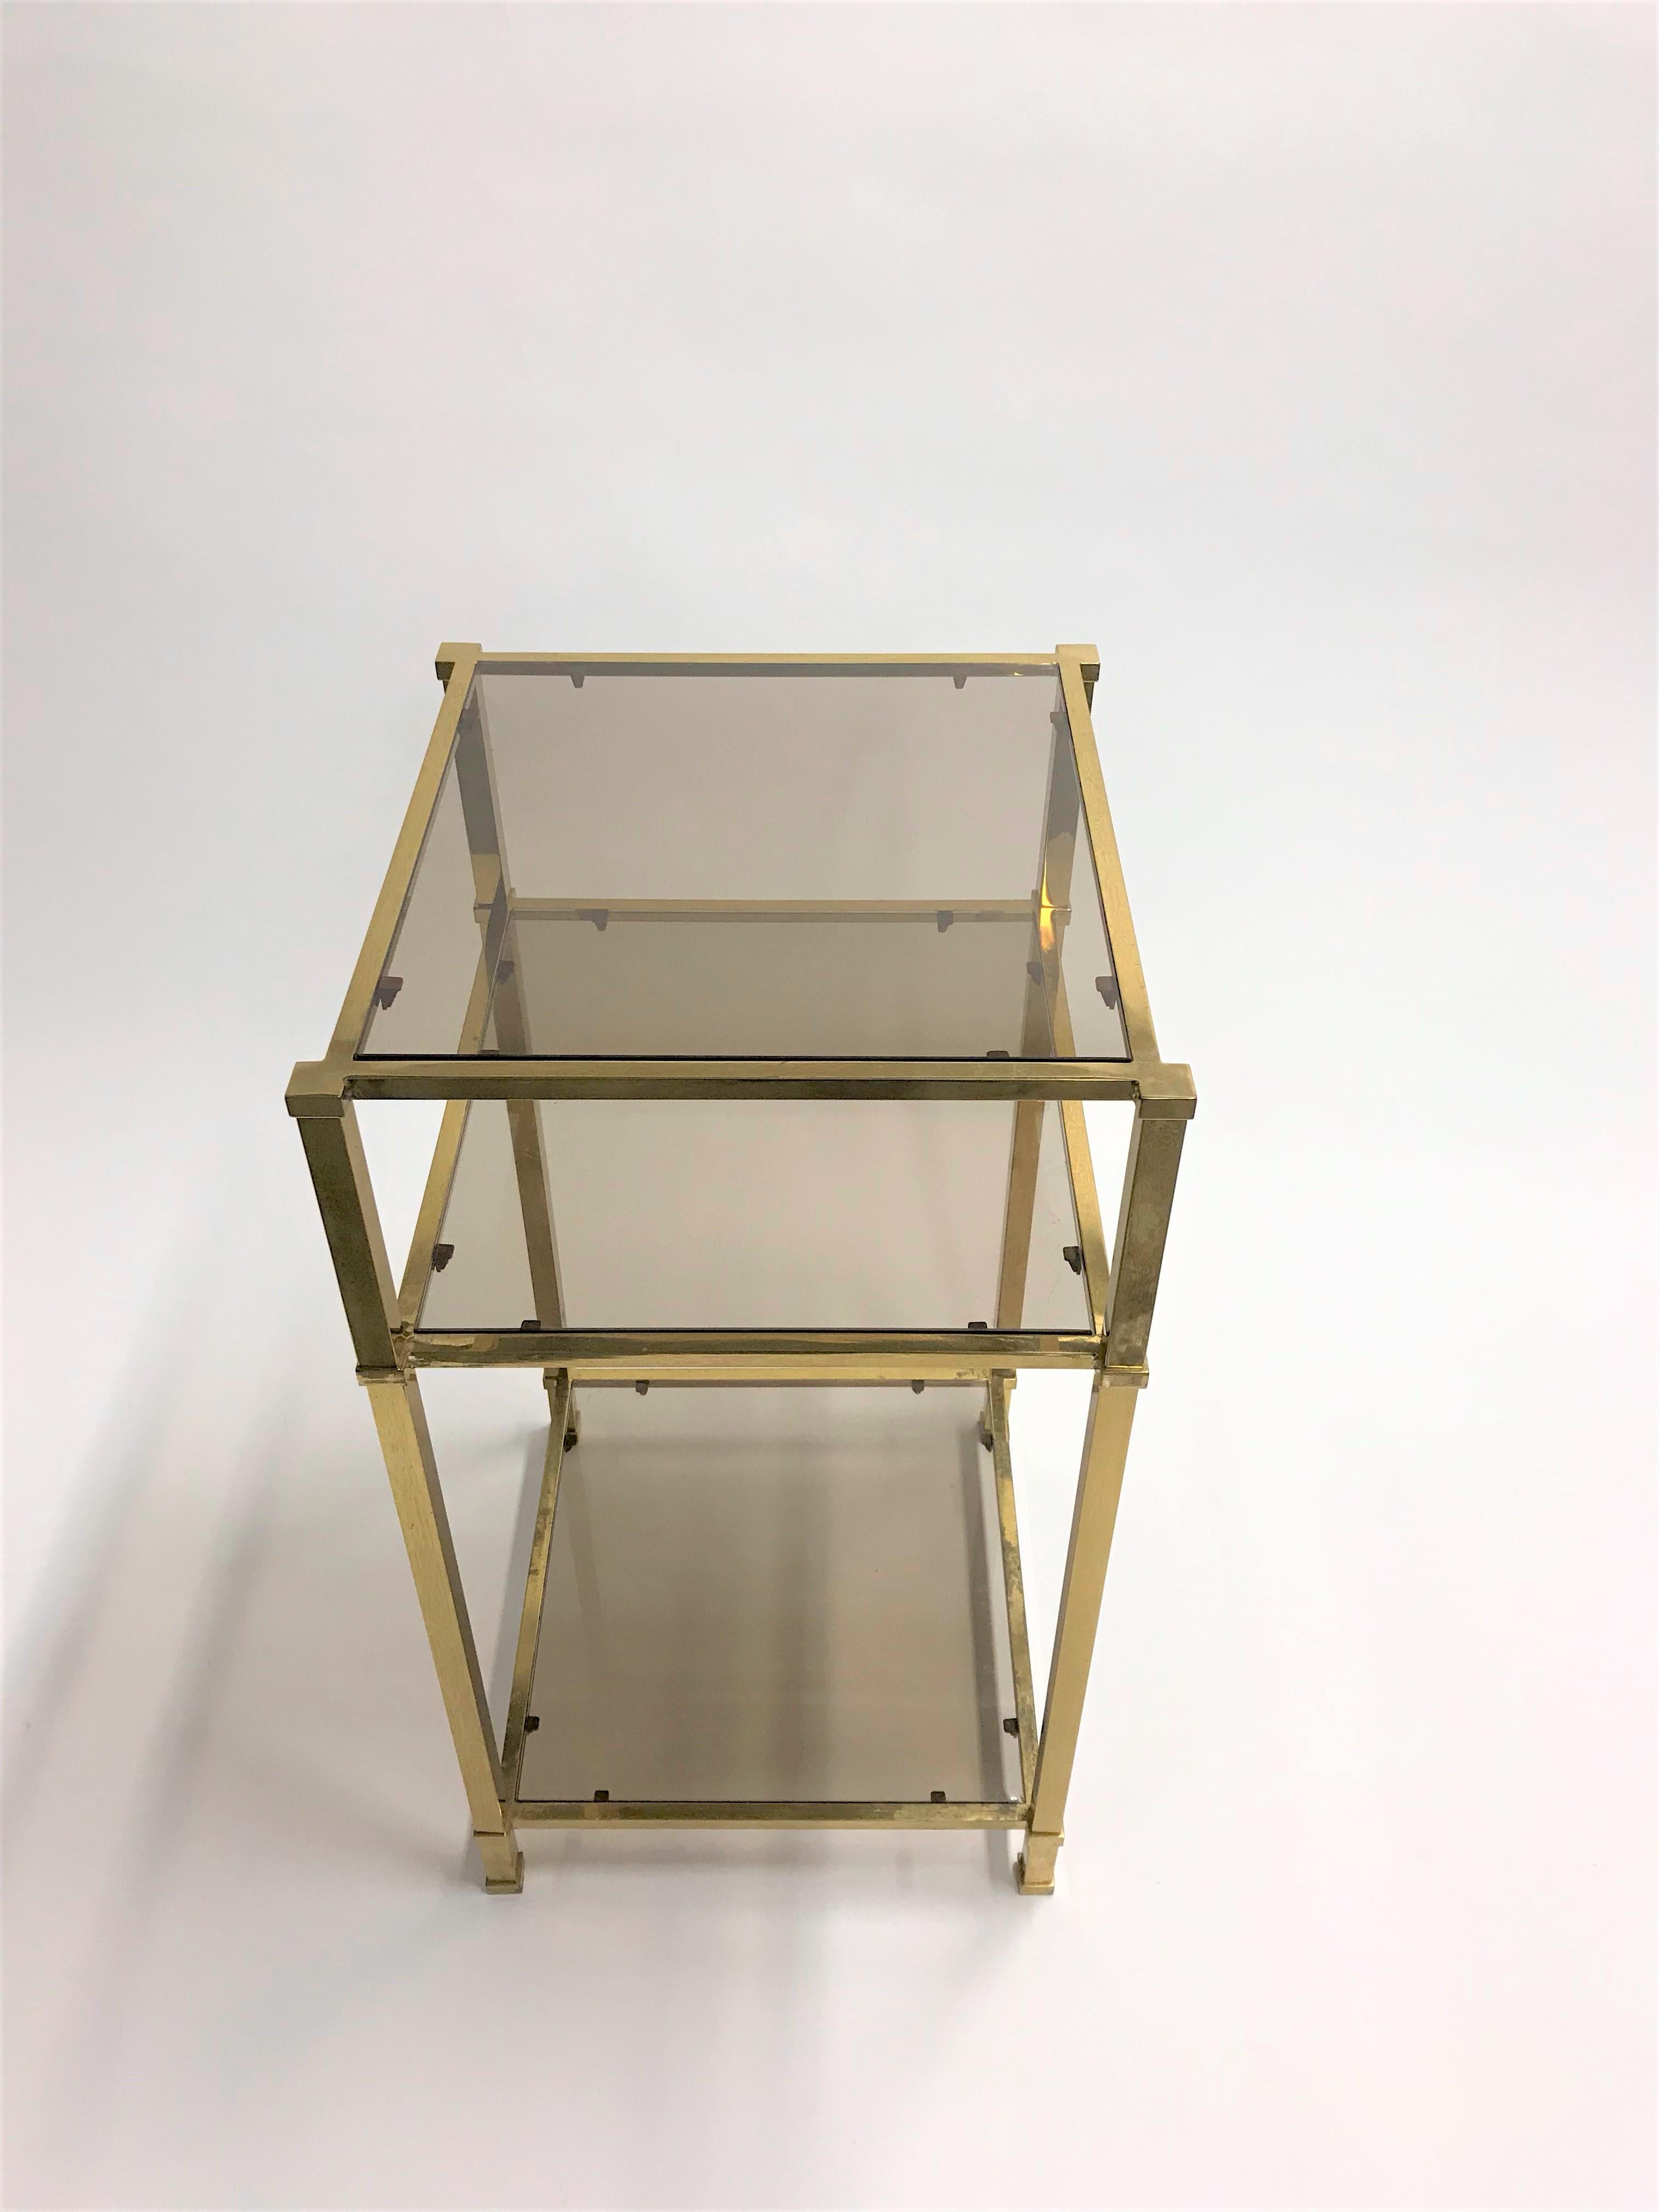 Brass tree tier smoked glass side table.

This Hollywood regency side table is rather unusual due to it's three glass layers.

Ideal to use as a display table or side table.

Good condition, slight patina on the brass.

Belgium,